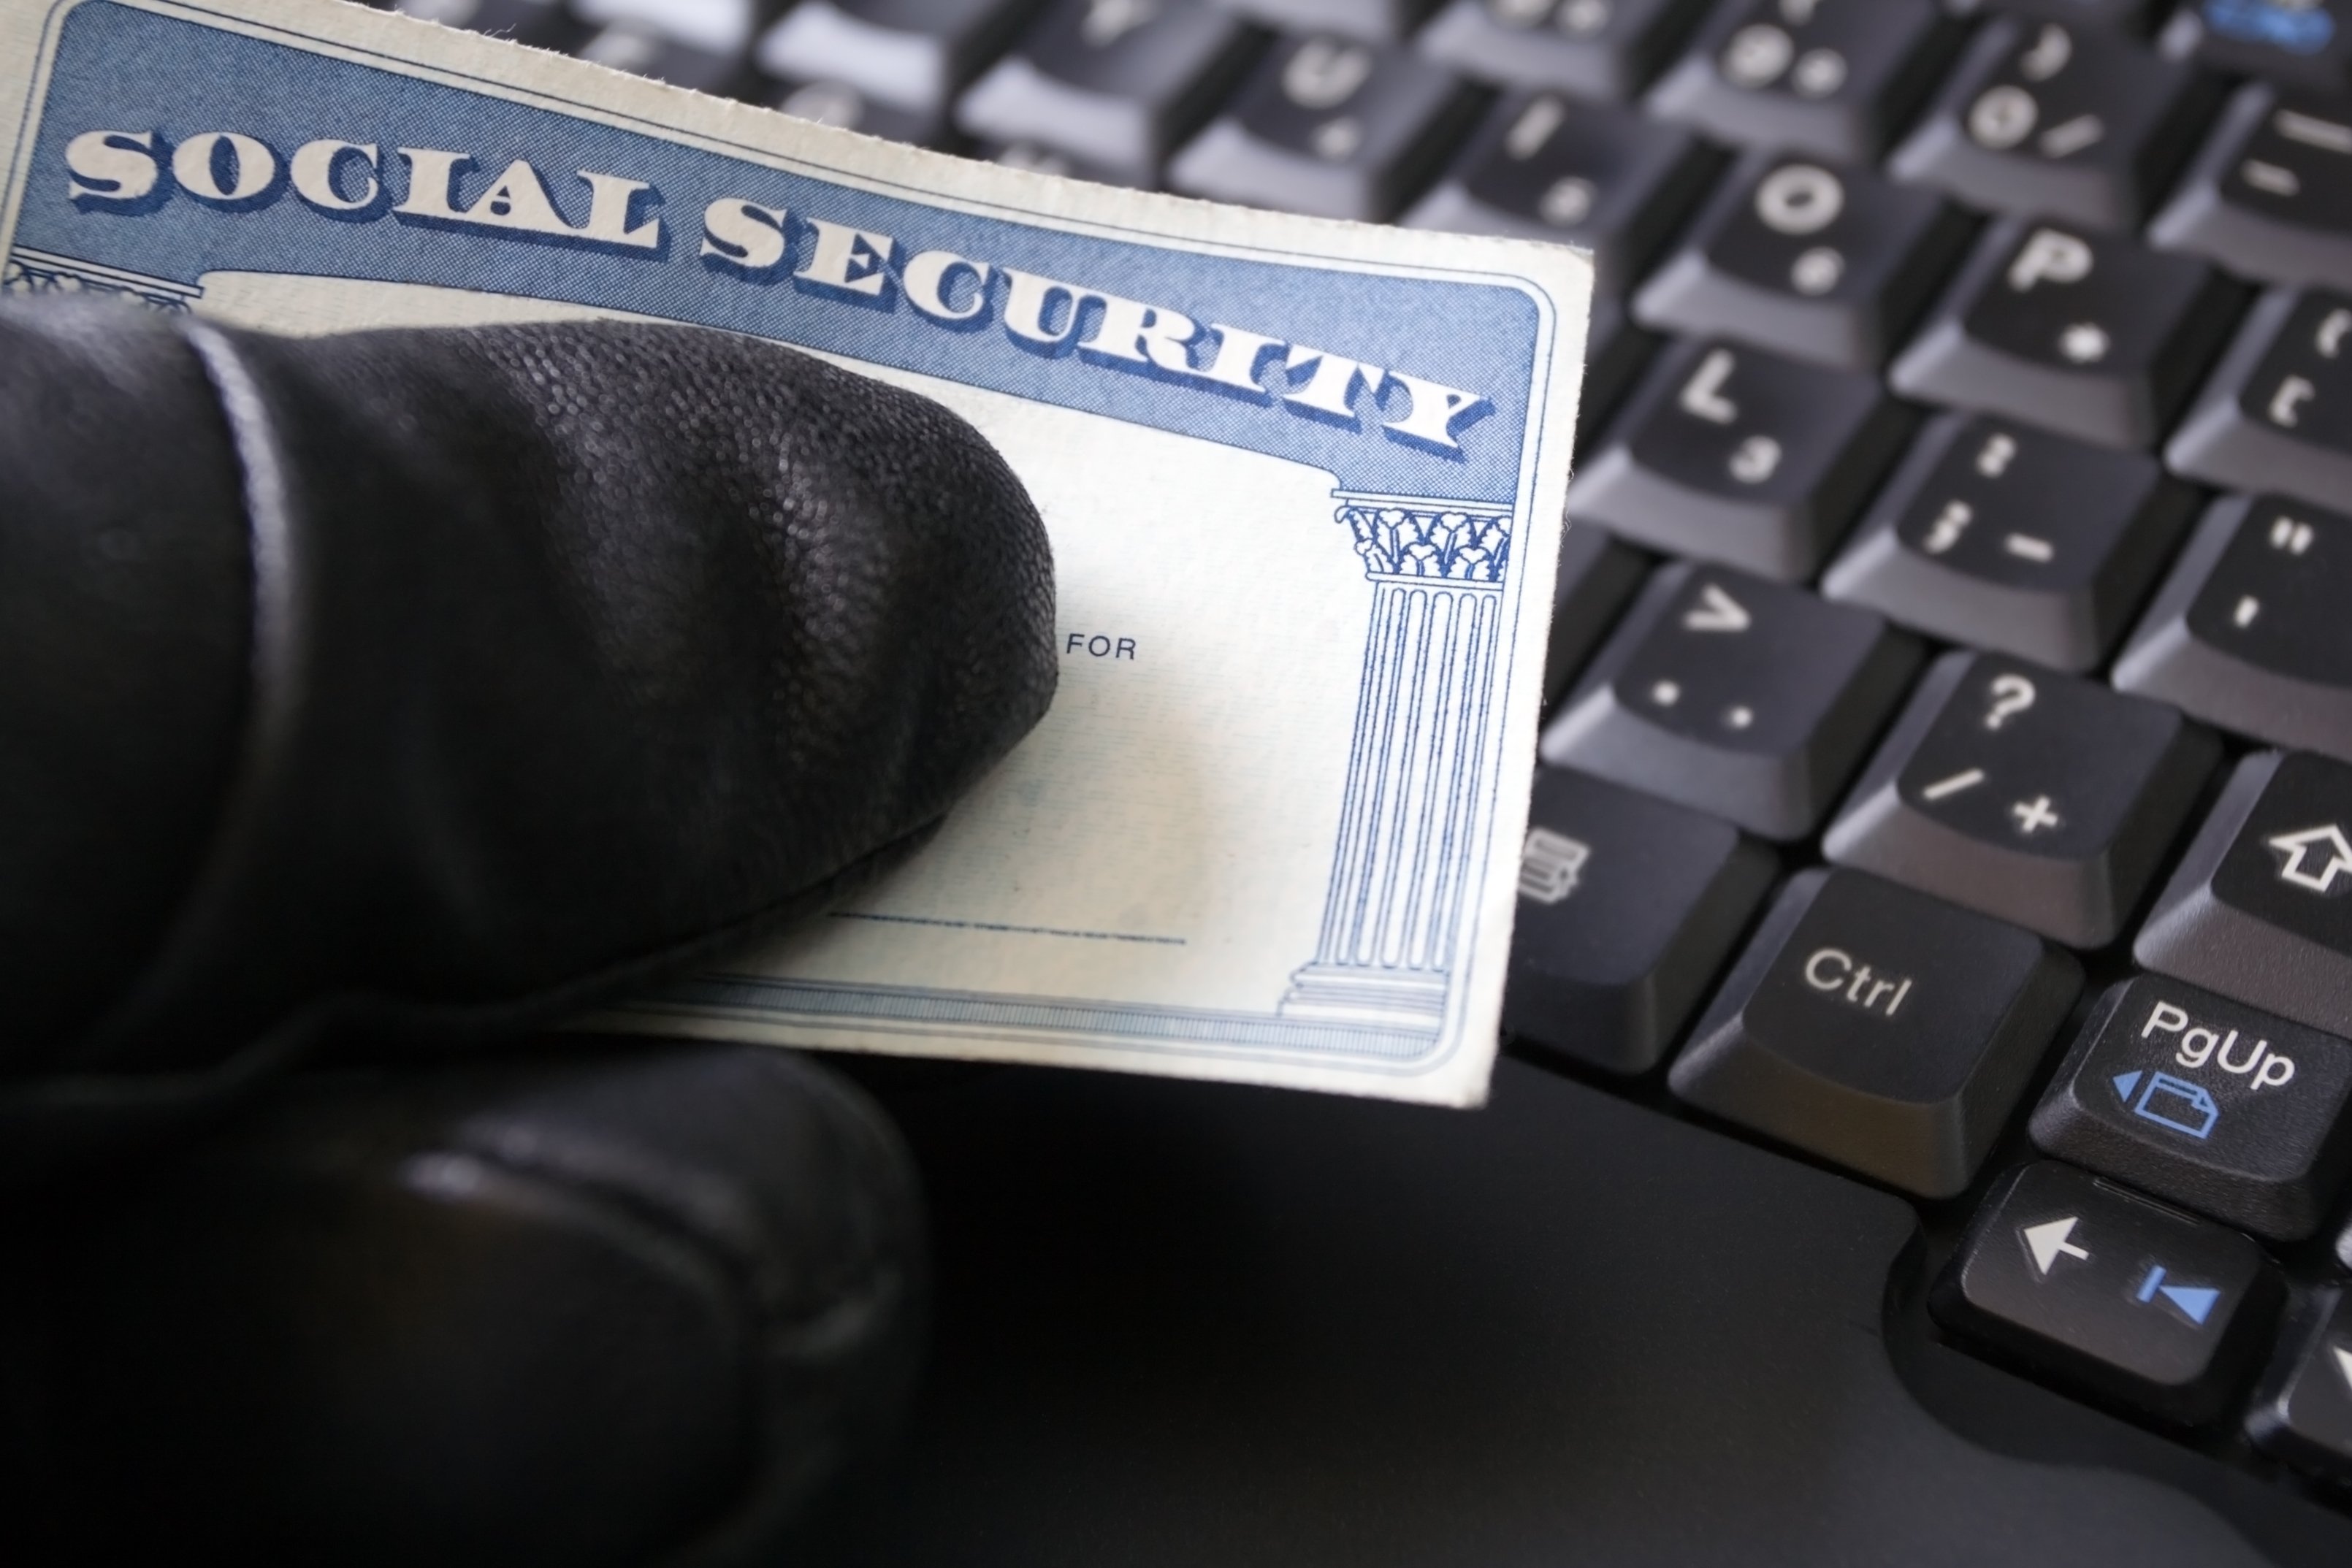 You’re Most Likely to Be a Victim of Identity Theft or Fraud in These 15 States